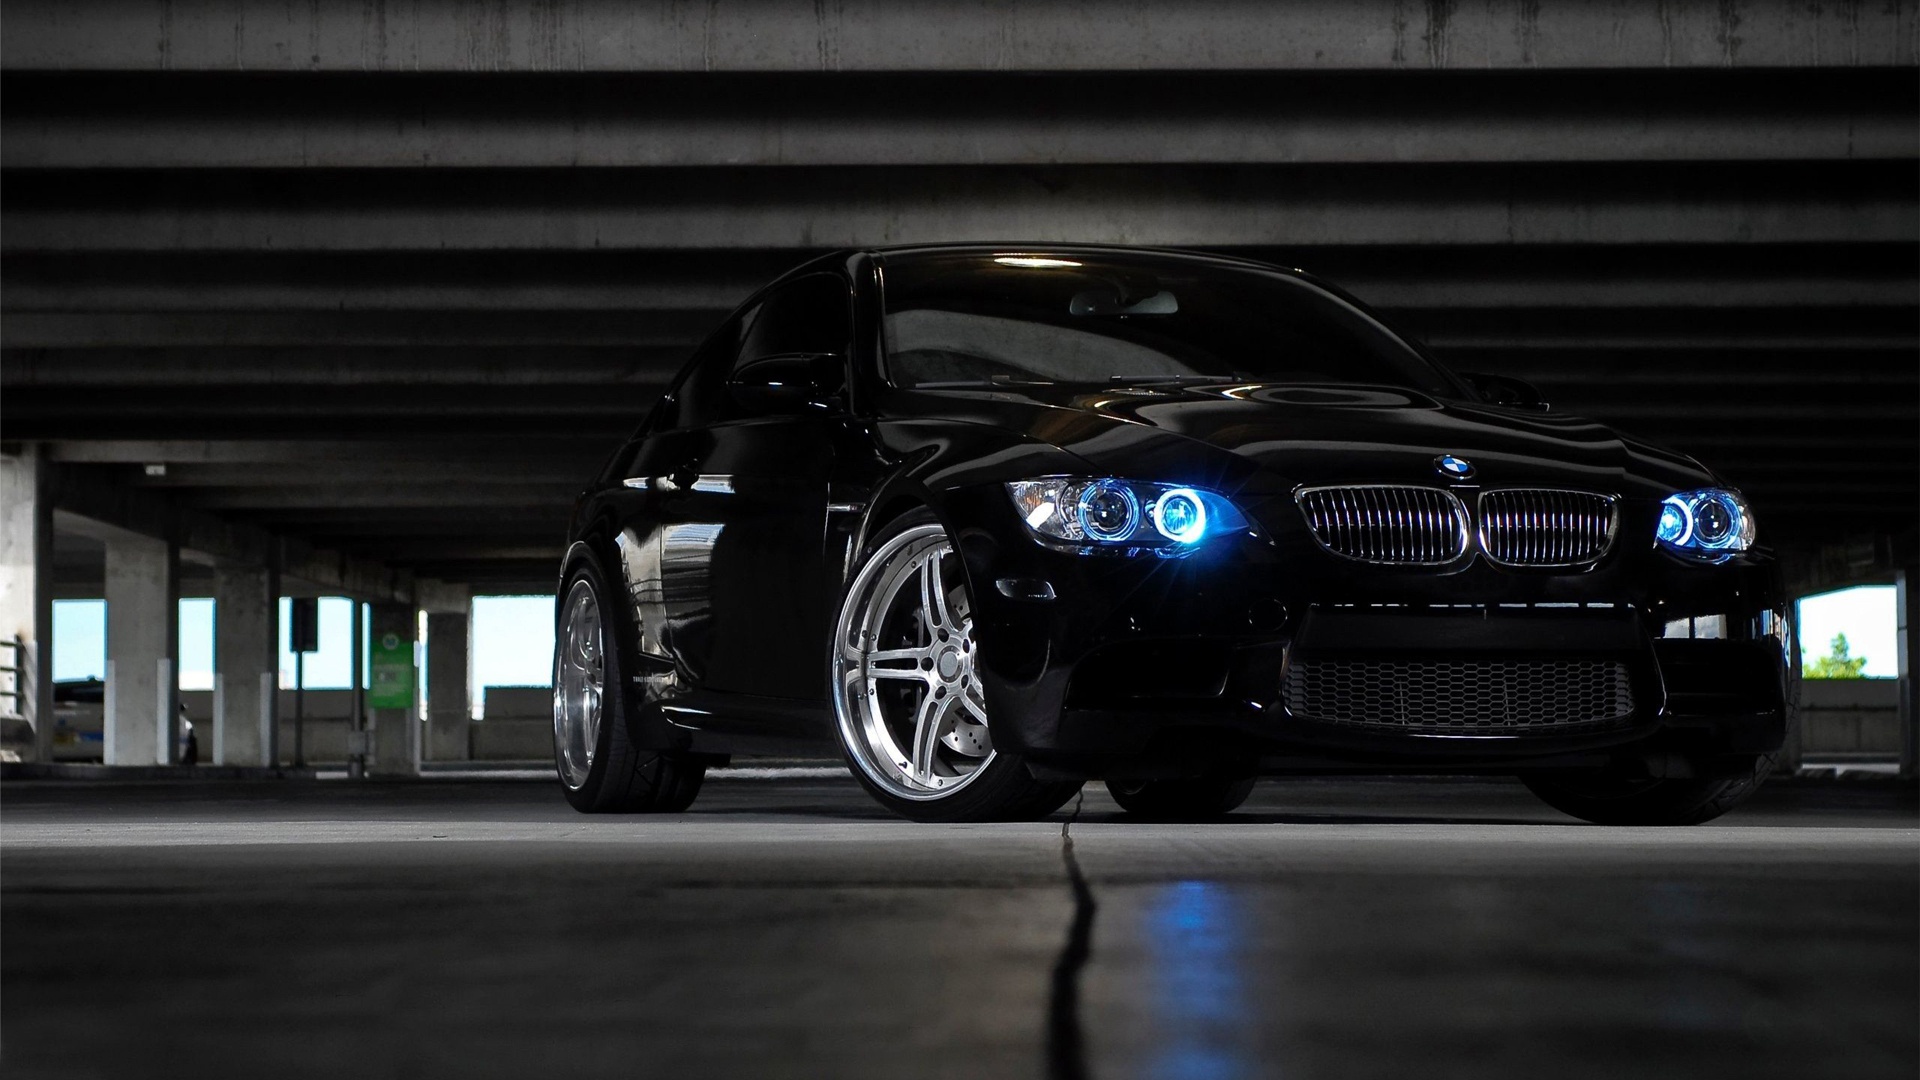 Bmw Hd Wallpapers For Pc